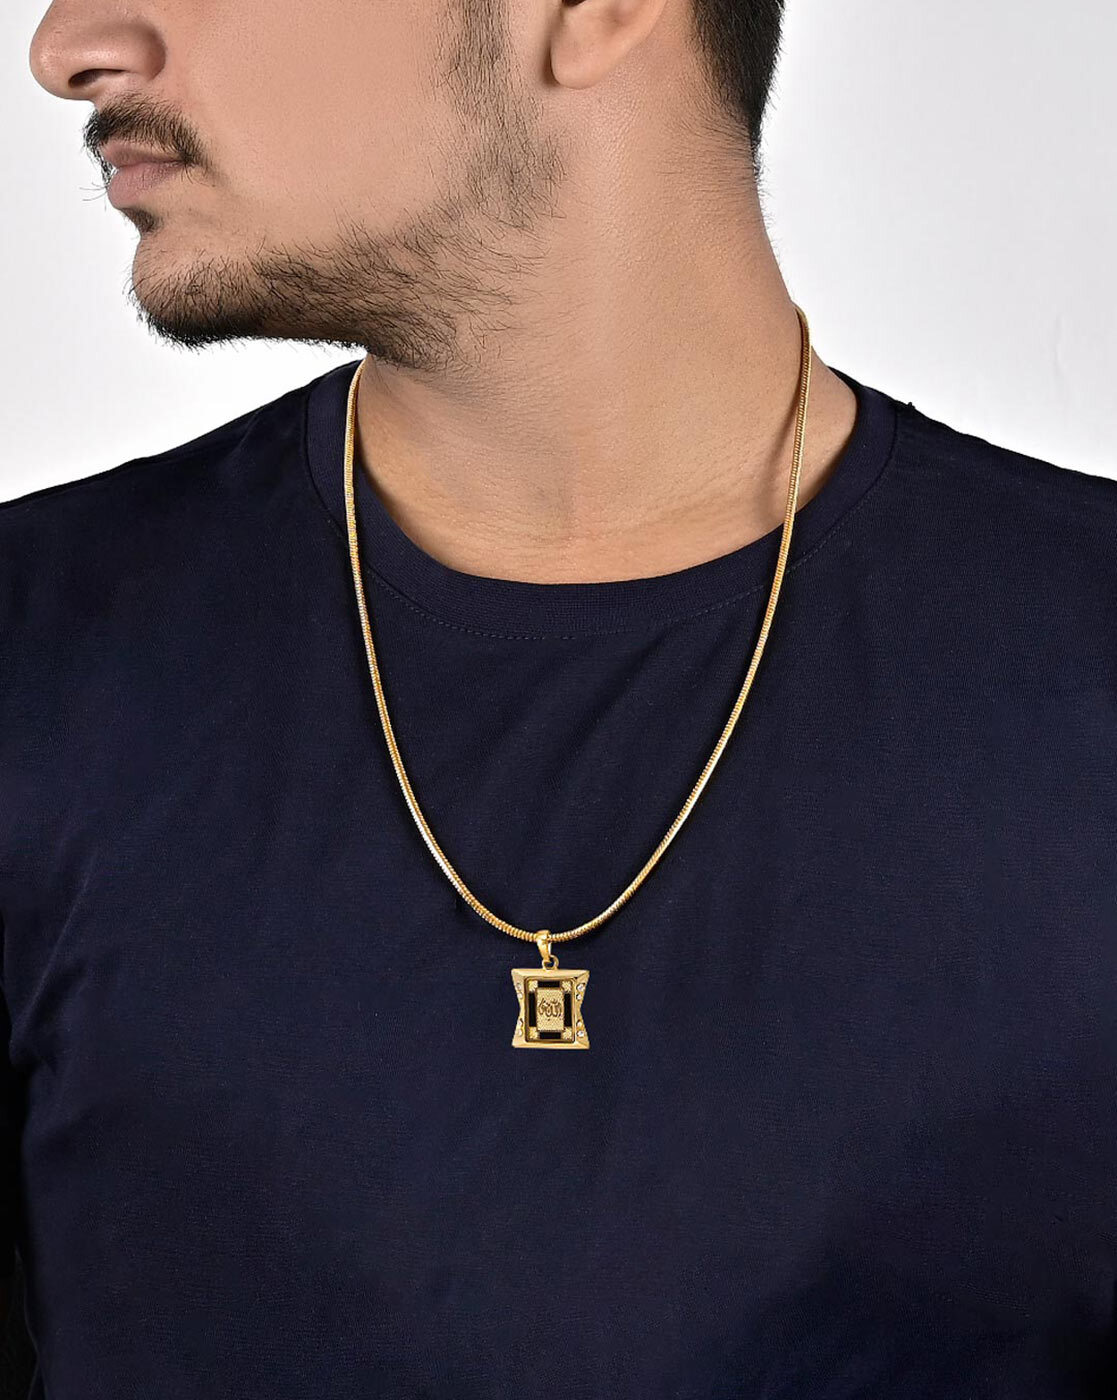 Buy Gold-Toned Chains for Men by Tistabene Online